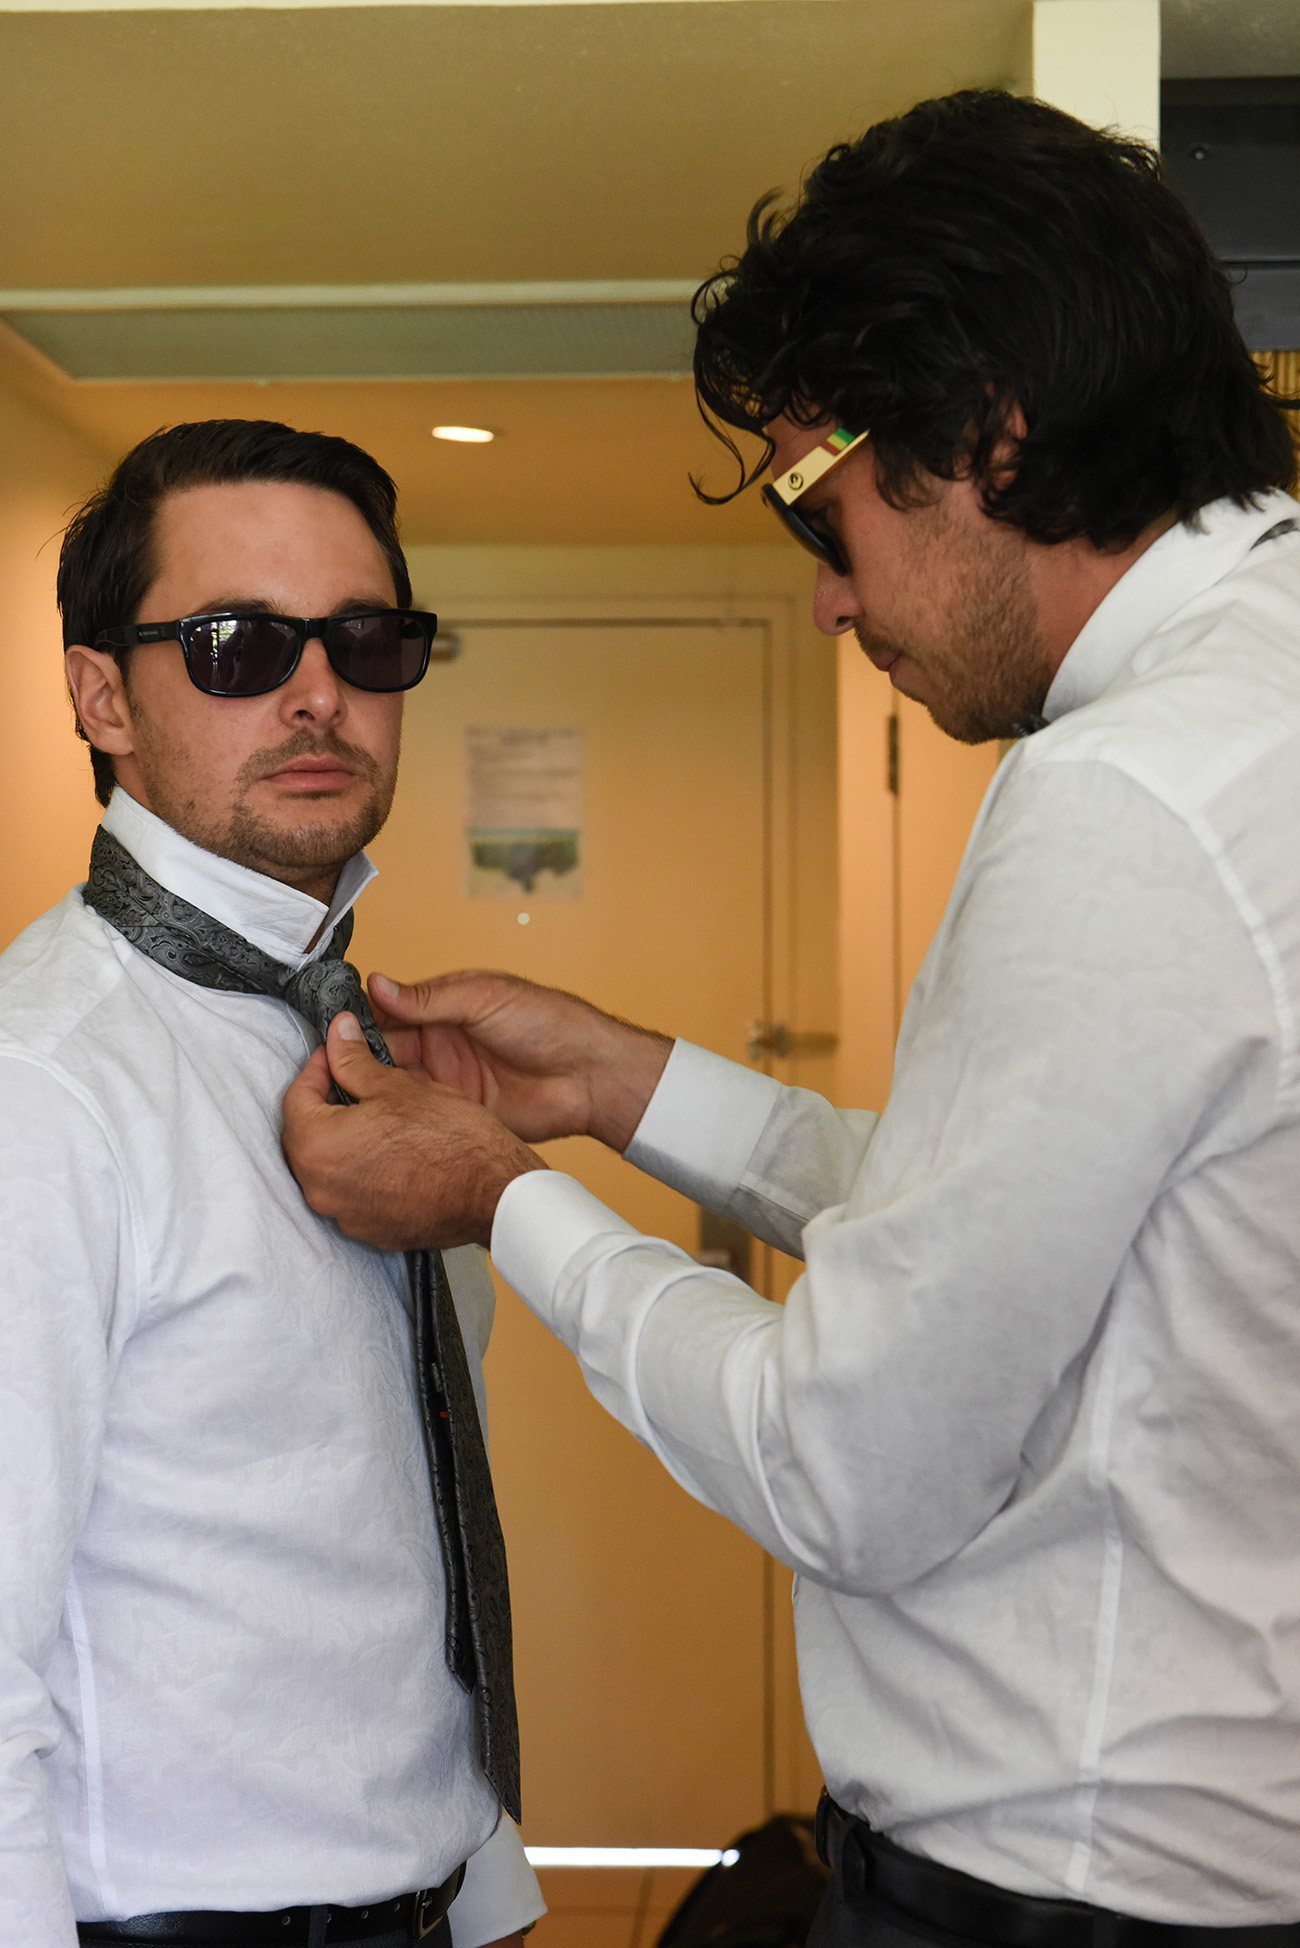 One of the groomsmen helping the groom to put his tie